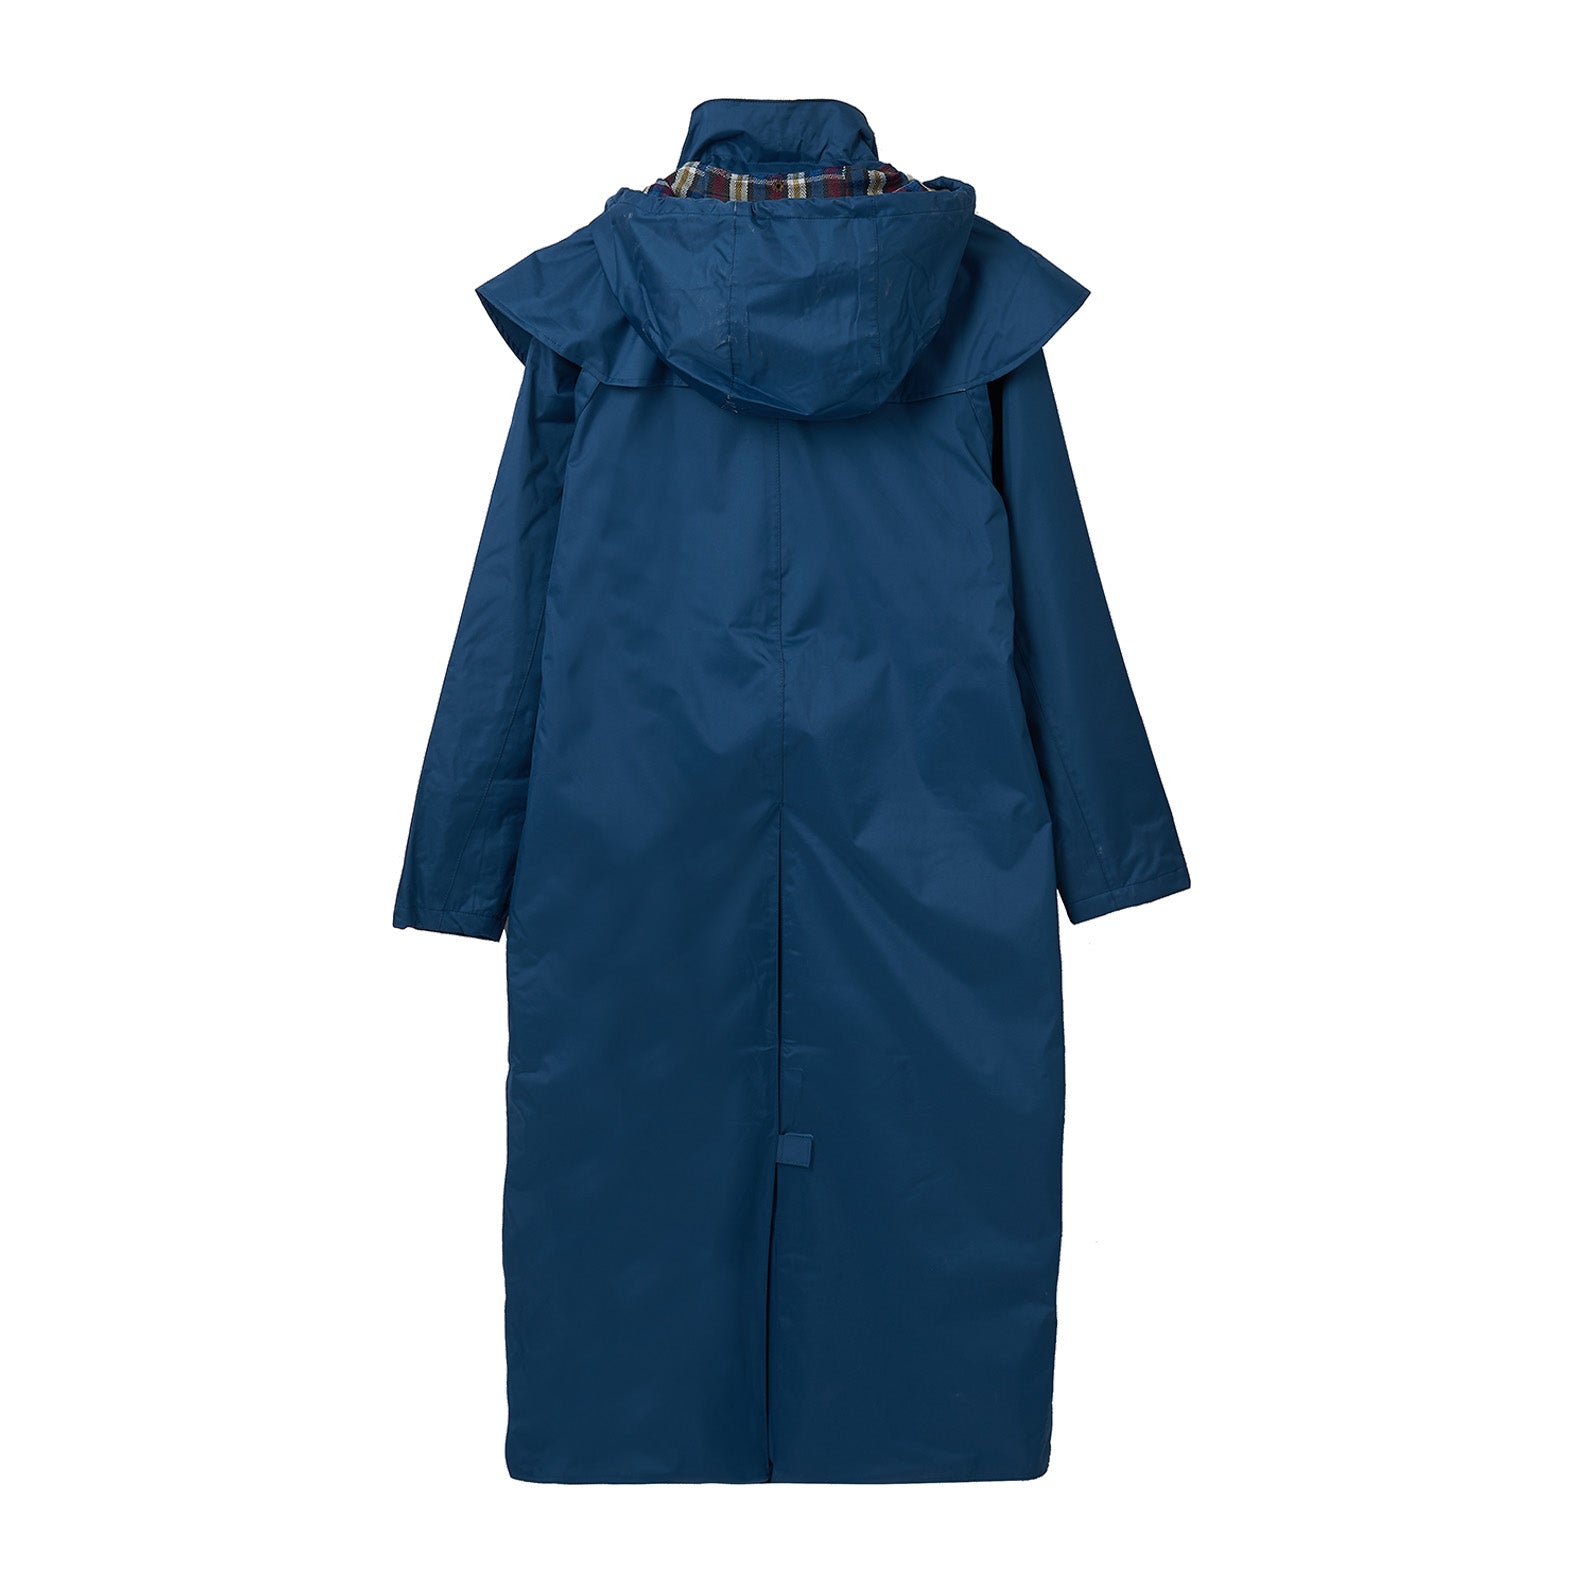 Lighthouse Outback Full Length Ladies Waterproof Raincoat – New Forest ...